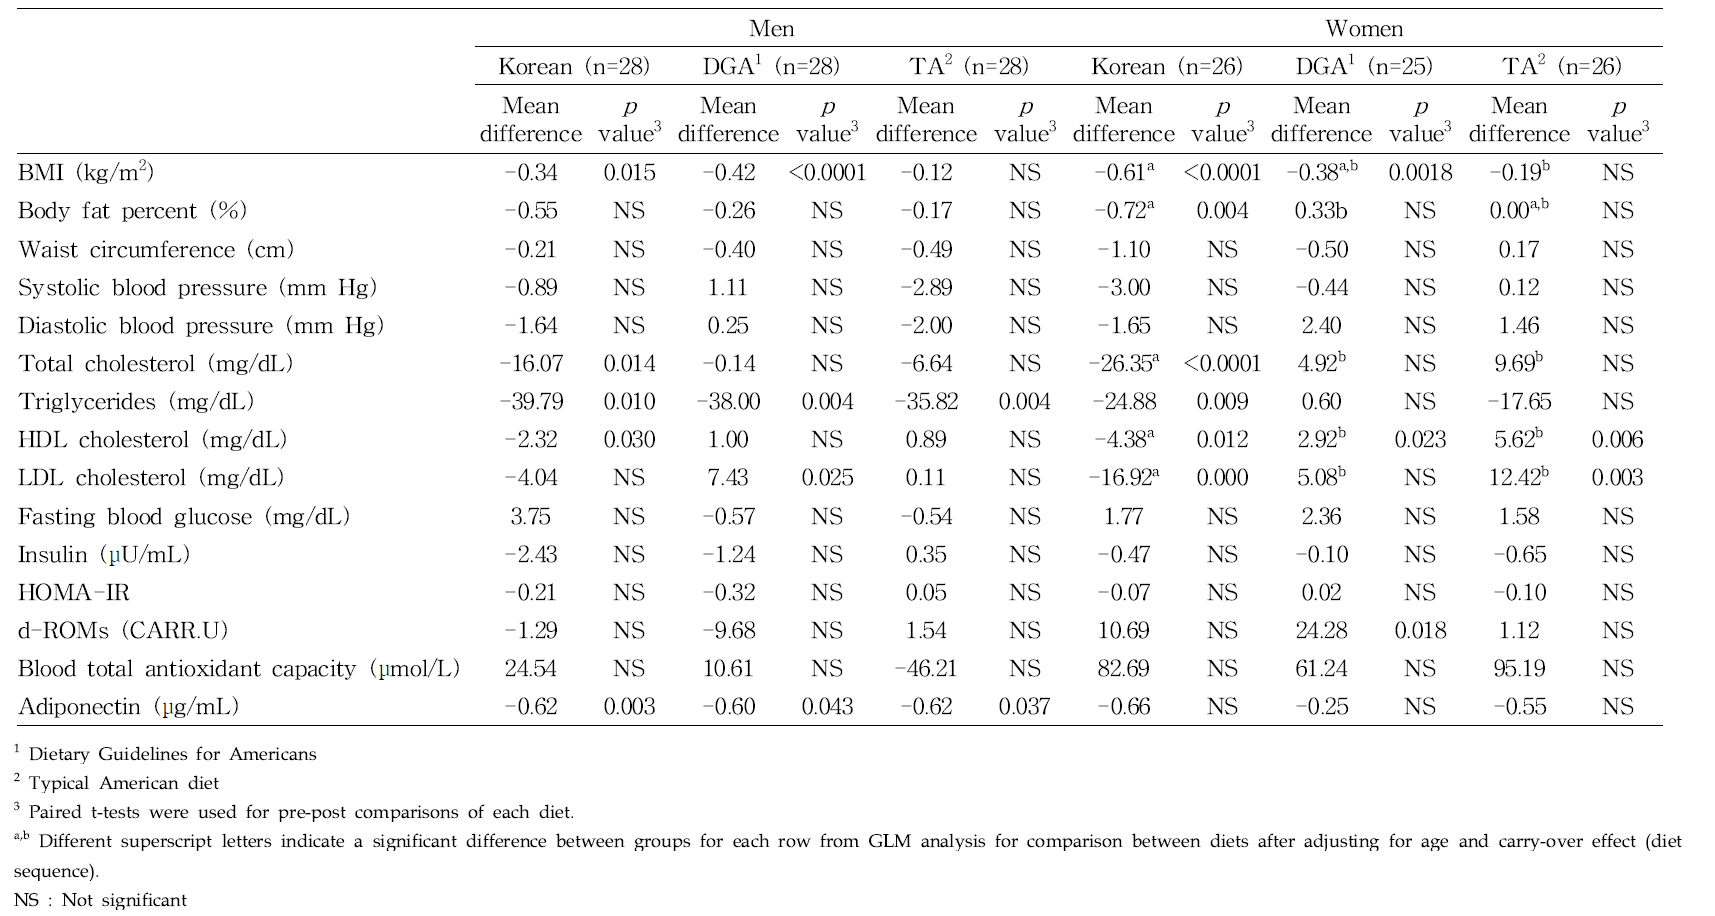 Changes in anthropometric and biochemical parameters by sex according to experimental diet